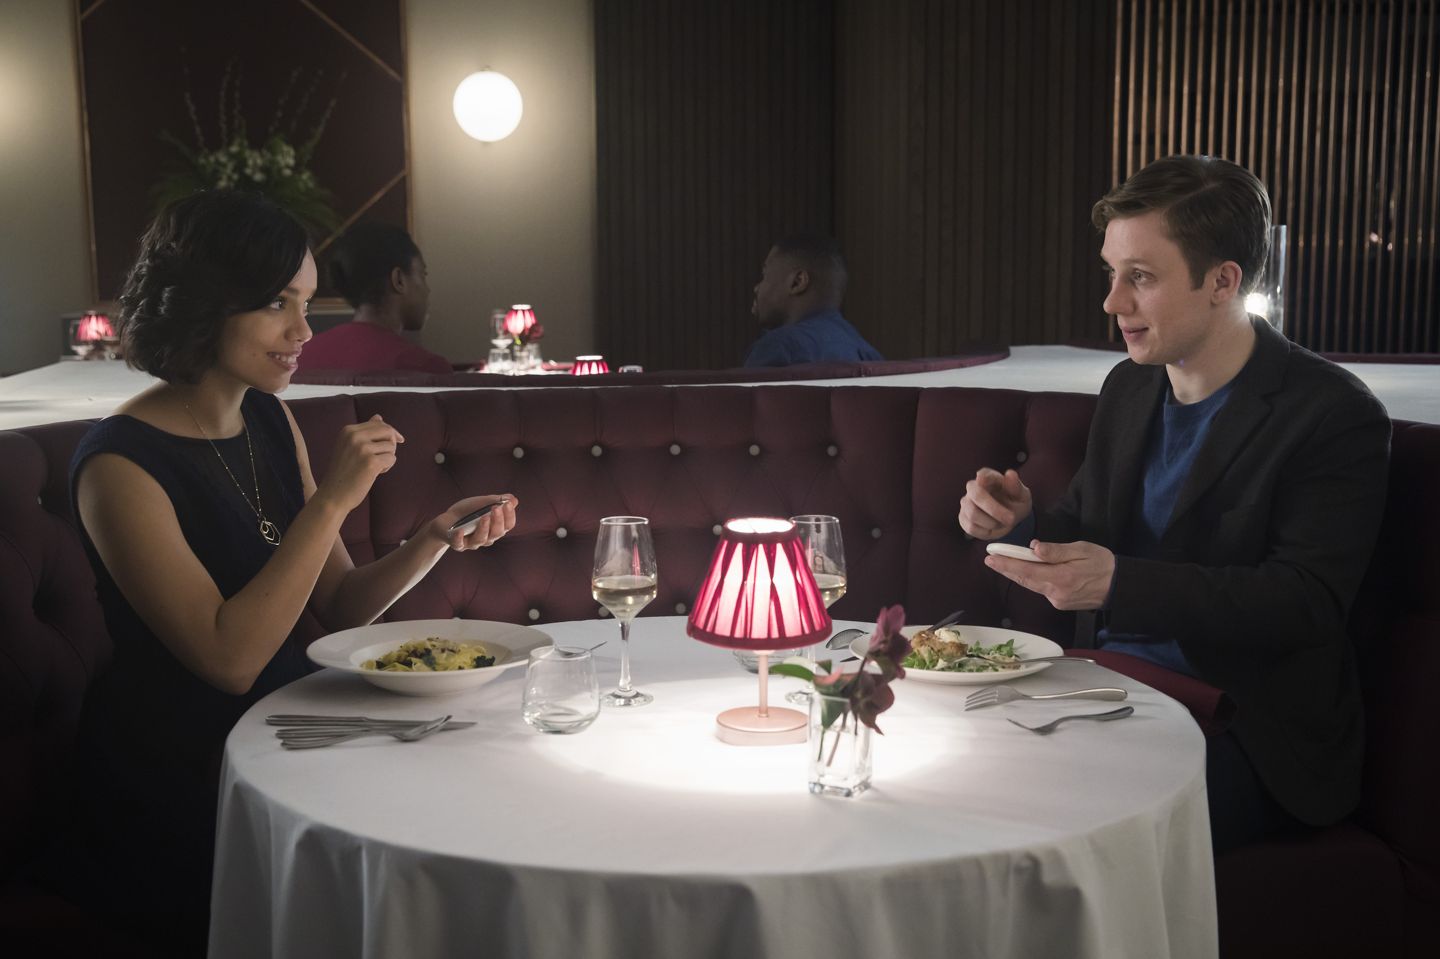 Georgina Campbell and Joe Cole in the Black Mirror episode "Hang the DJ"